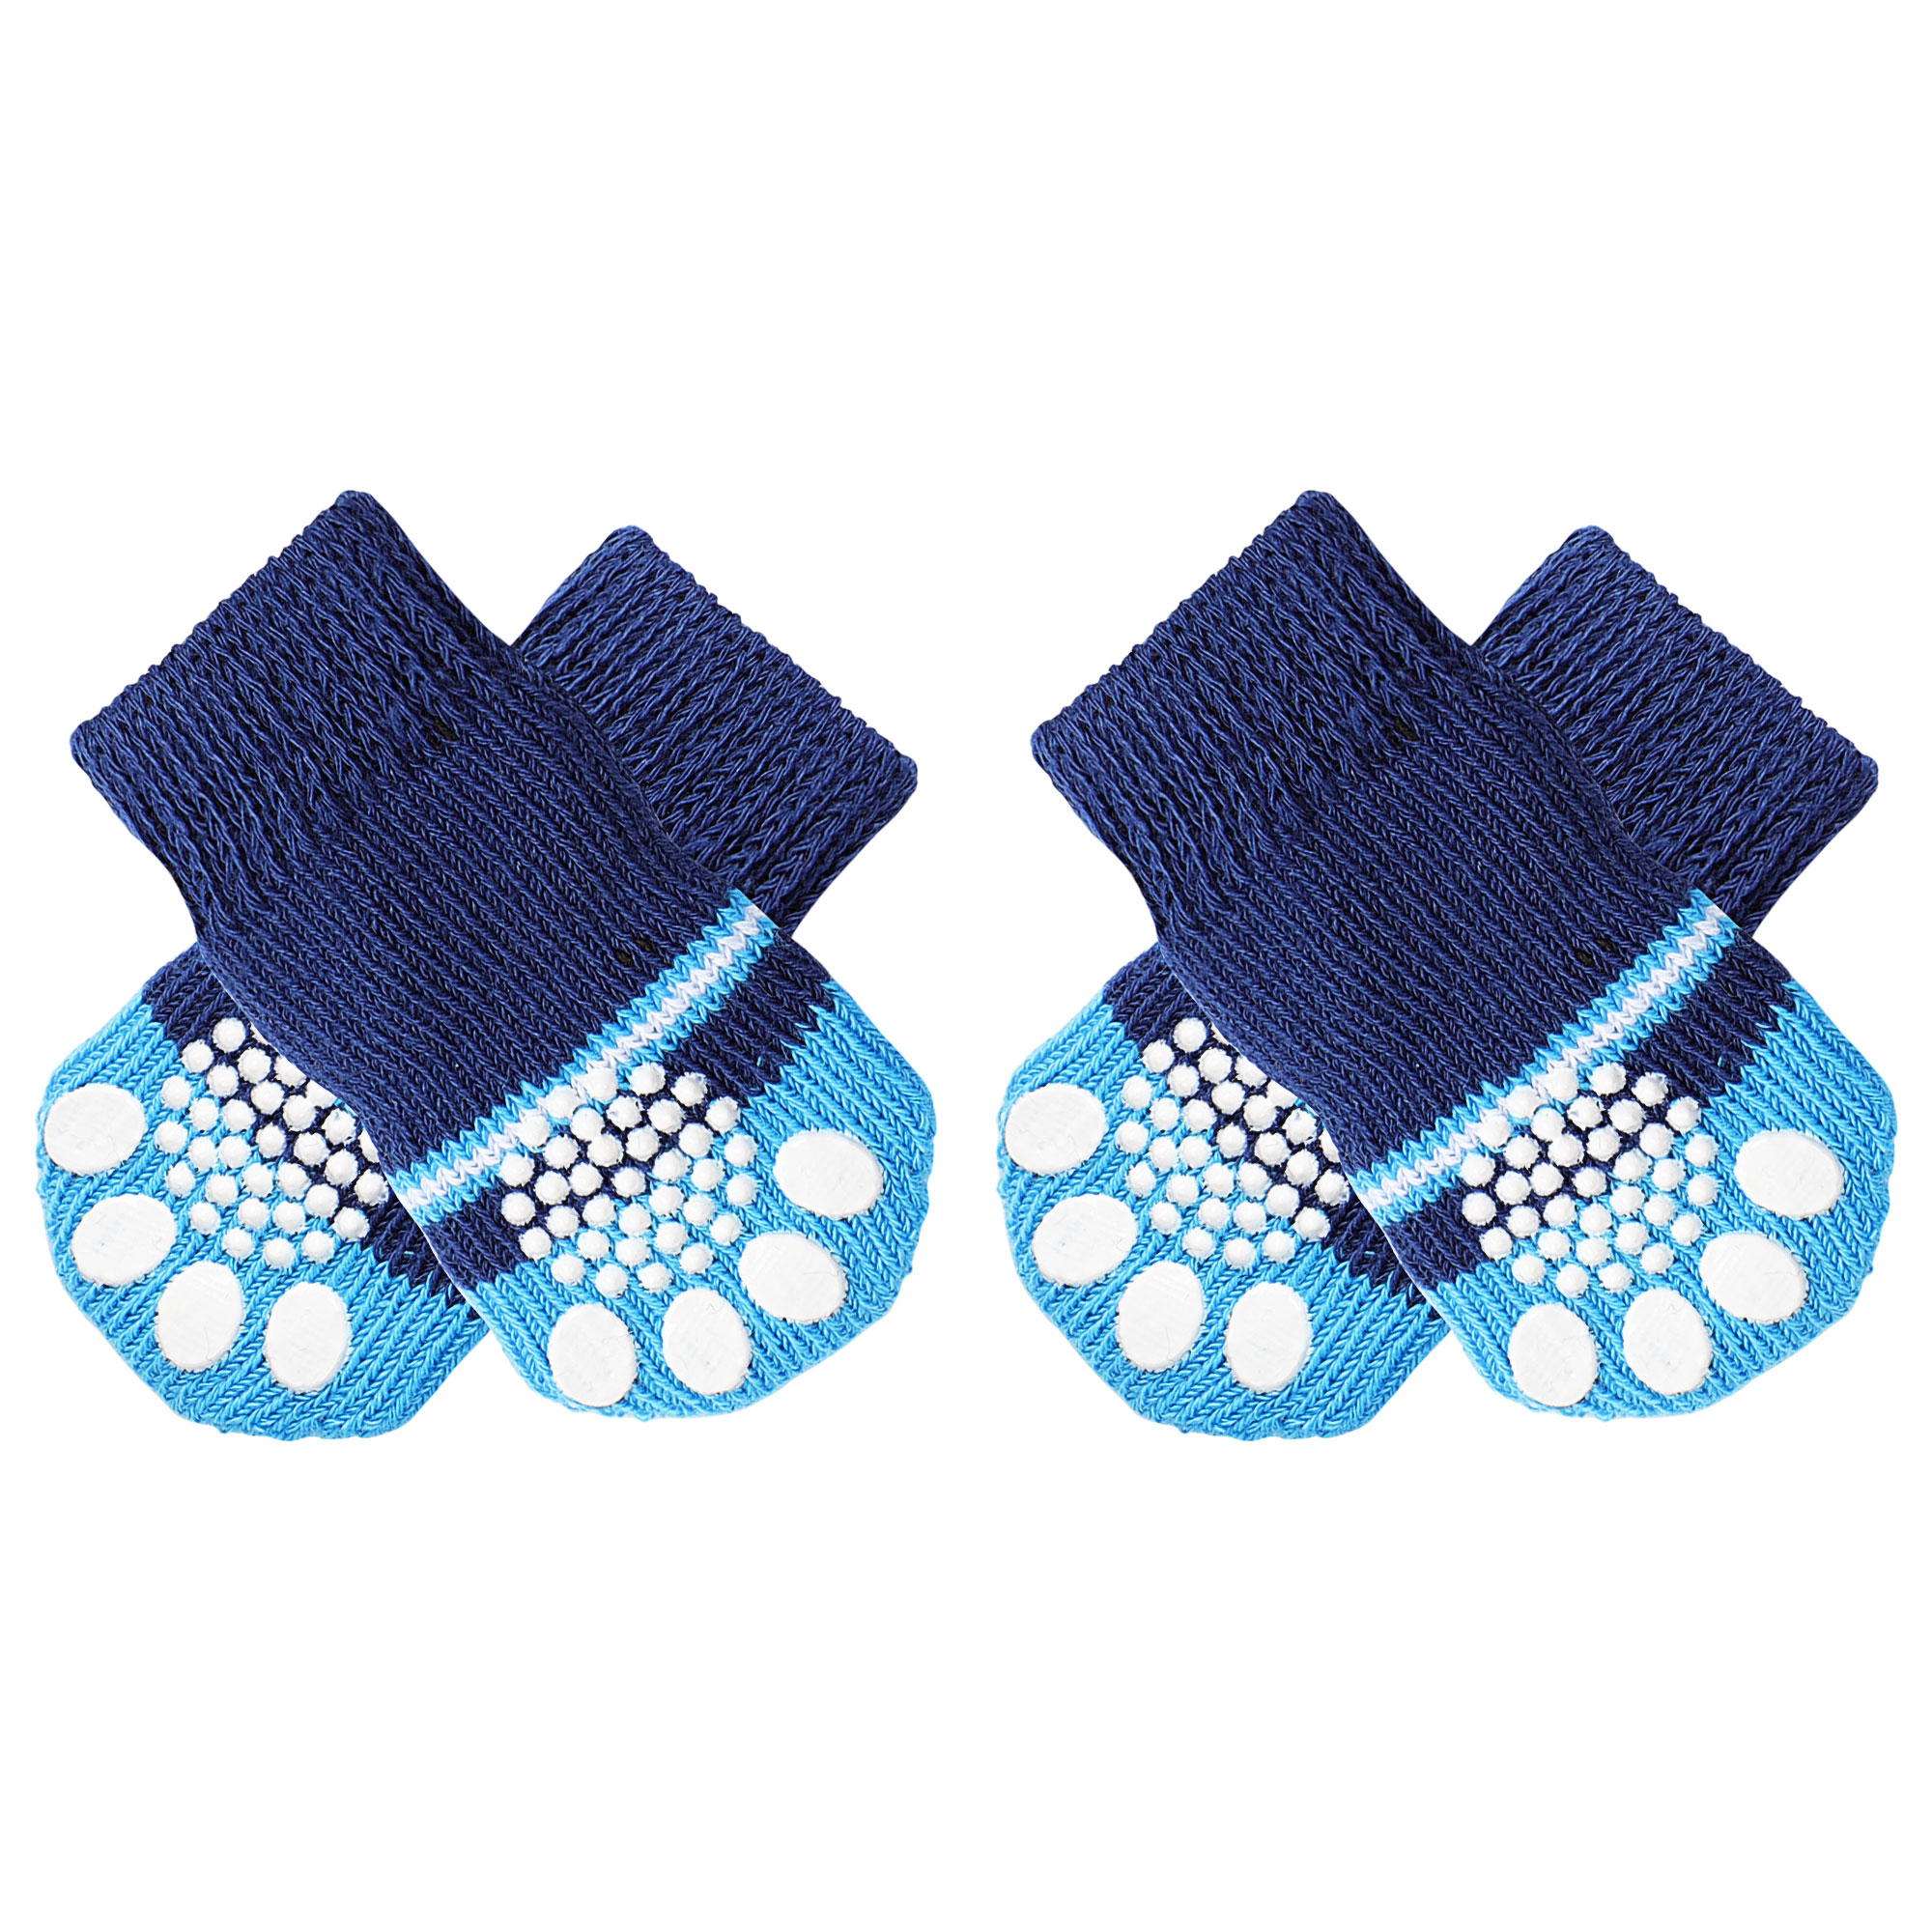 Unique Bargains 2 Pairs Doggy Pet Striped Stretchy Acrylic Knitted Socks Two Tone Blue Size M